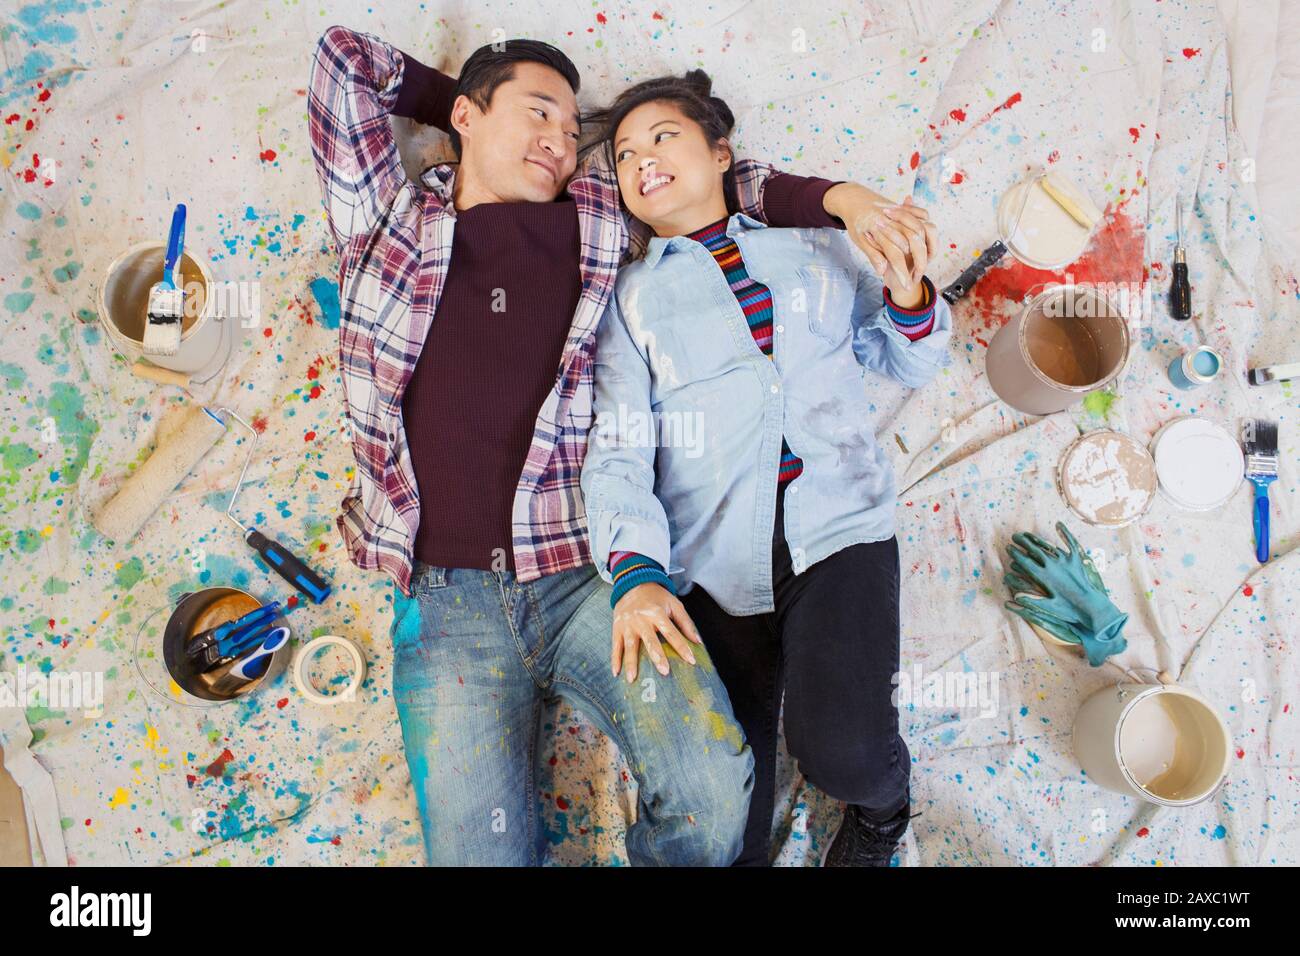 Happy couple relaxing, taking a break from painting, laying on dropcloth among paint cans Stock Photo